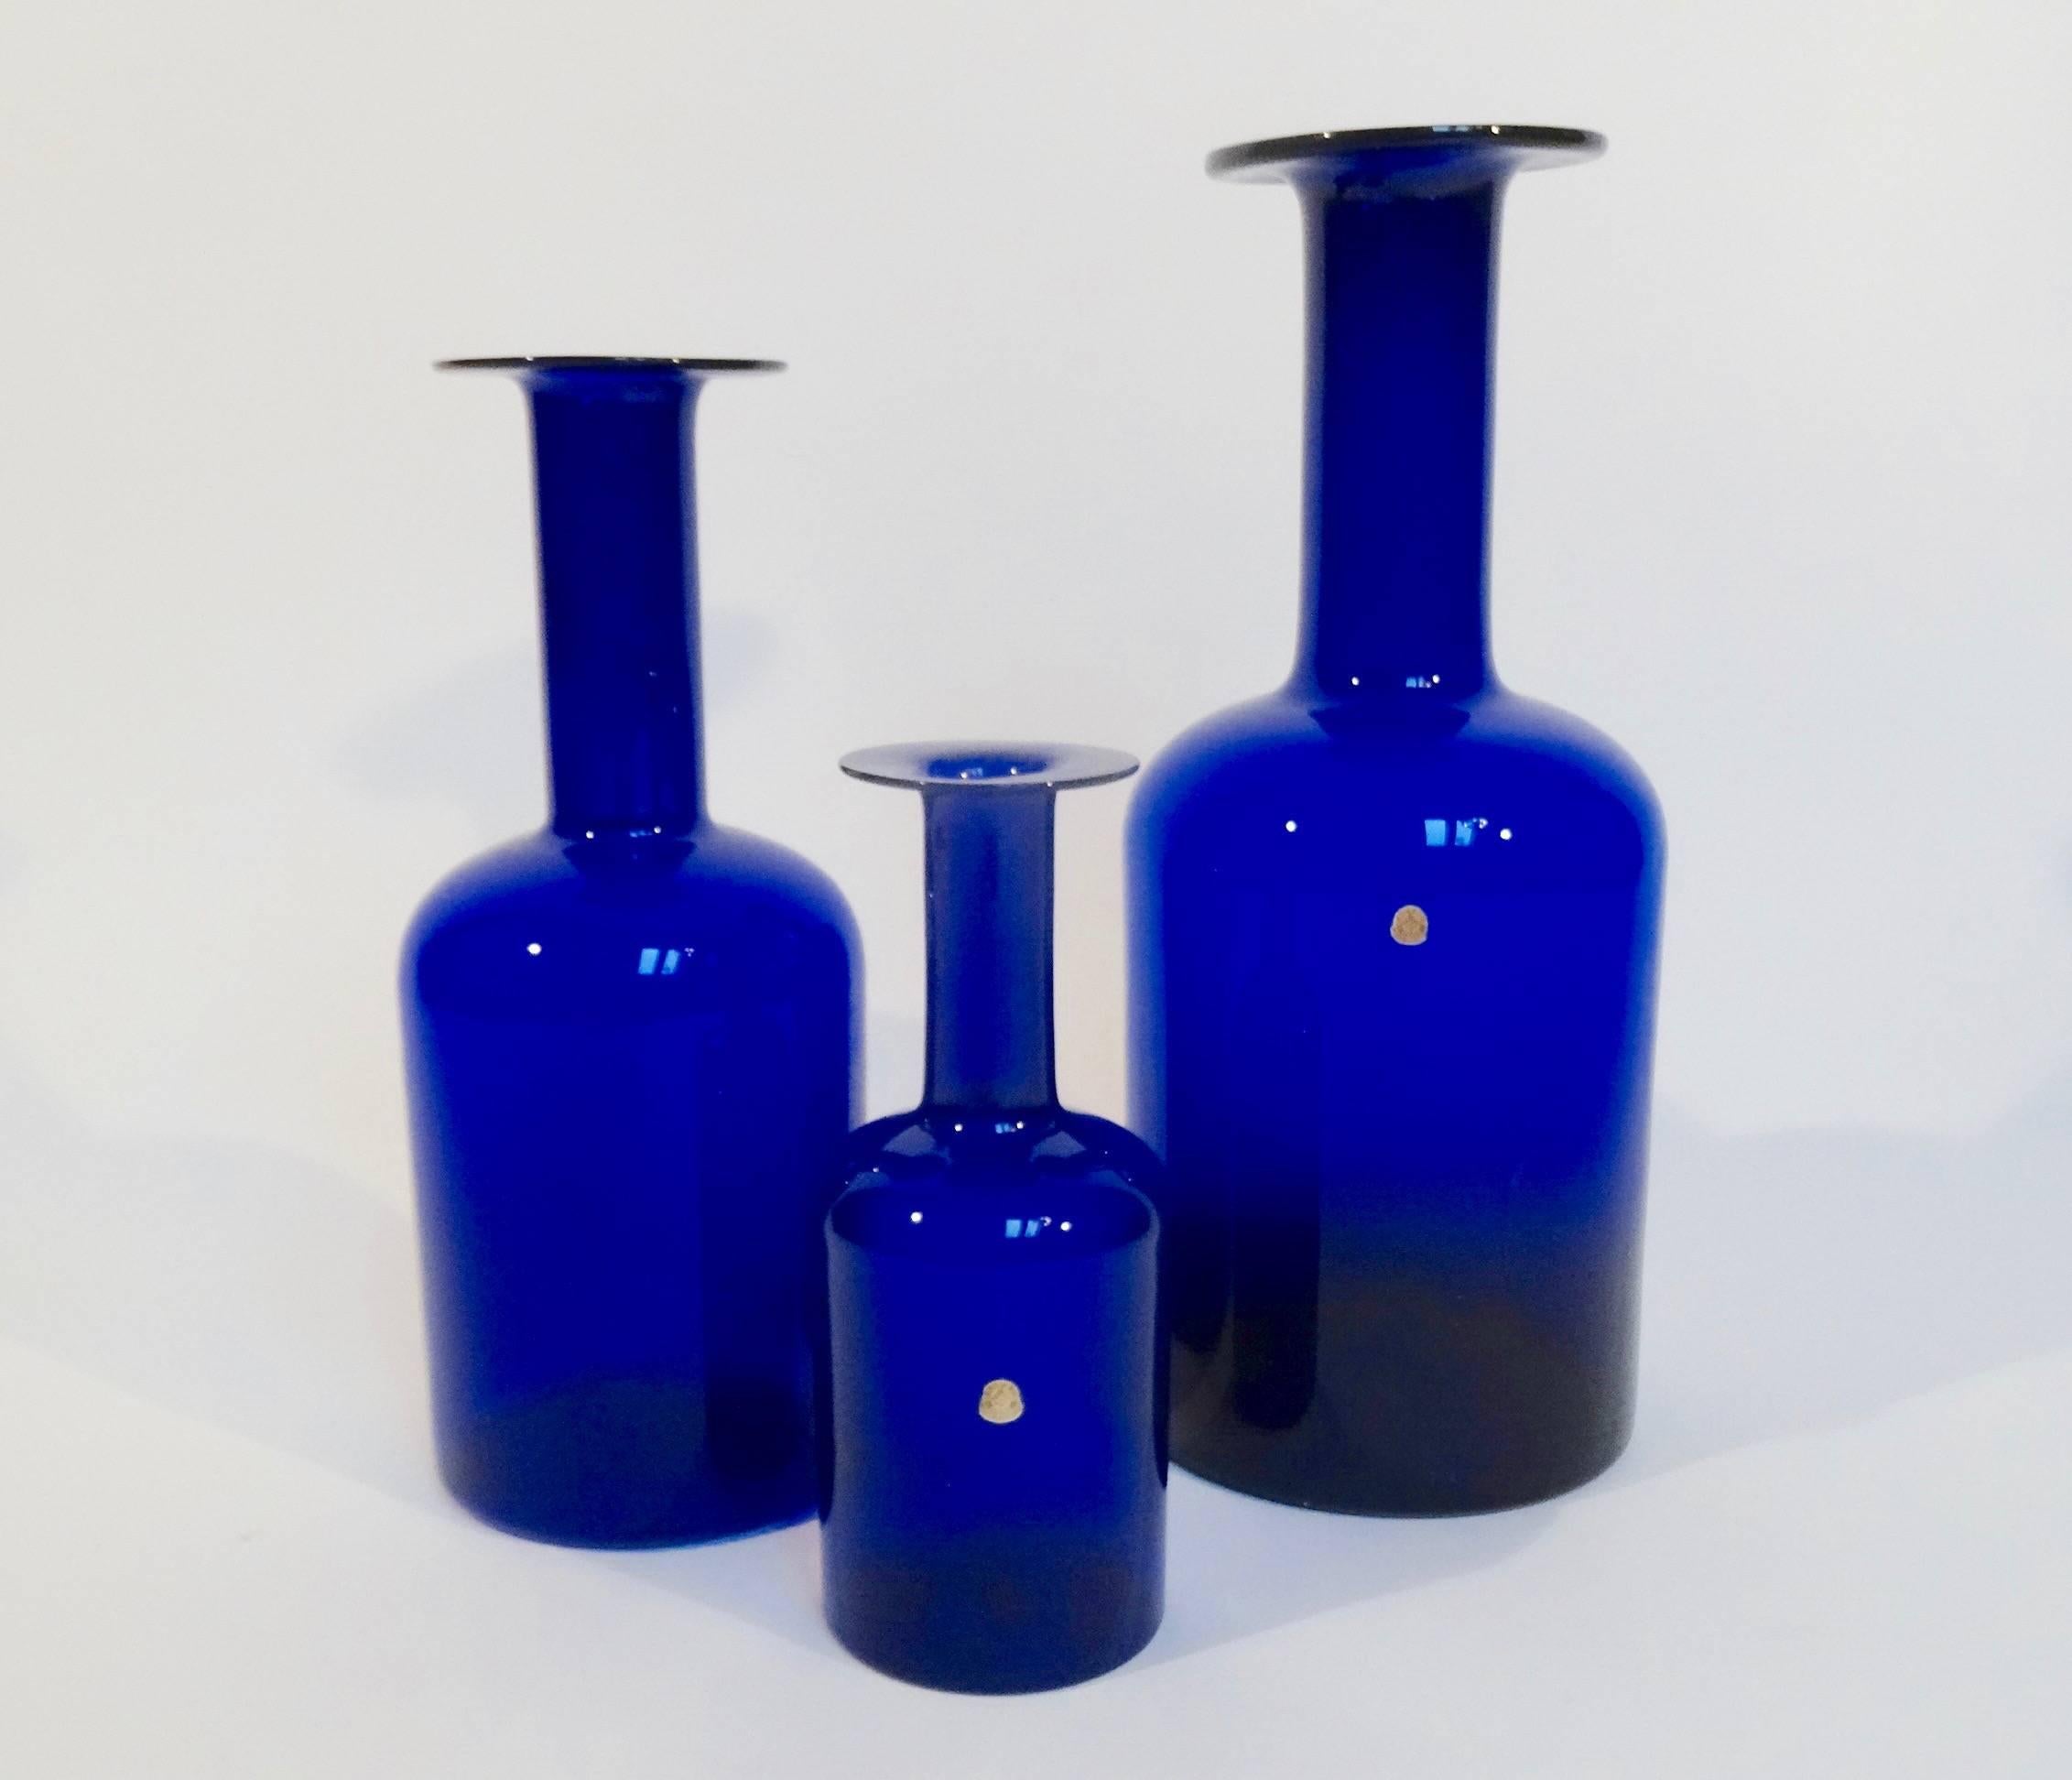 Set of three original floor vases (gulvvase) from Kastrup glasverk in 1959. They were designed by master glass blower Otto Brauer and the first vases were made in cobalt blue, green and brown. Sizes from 30 x 43 x 51 centimetres.